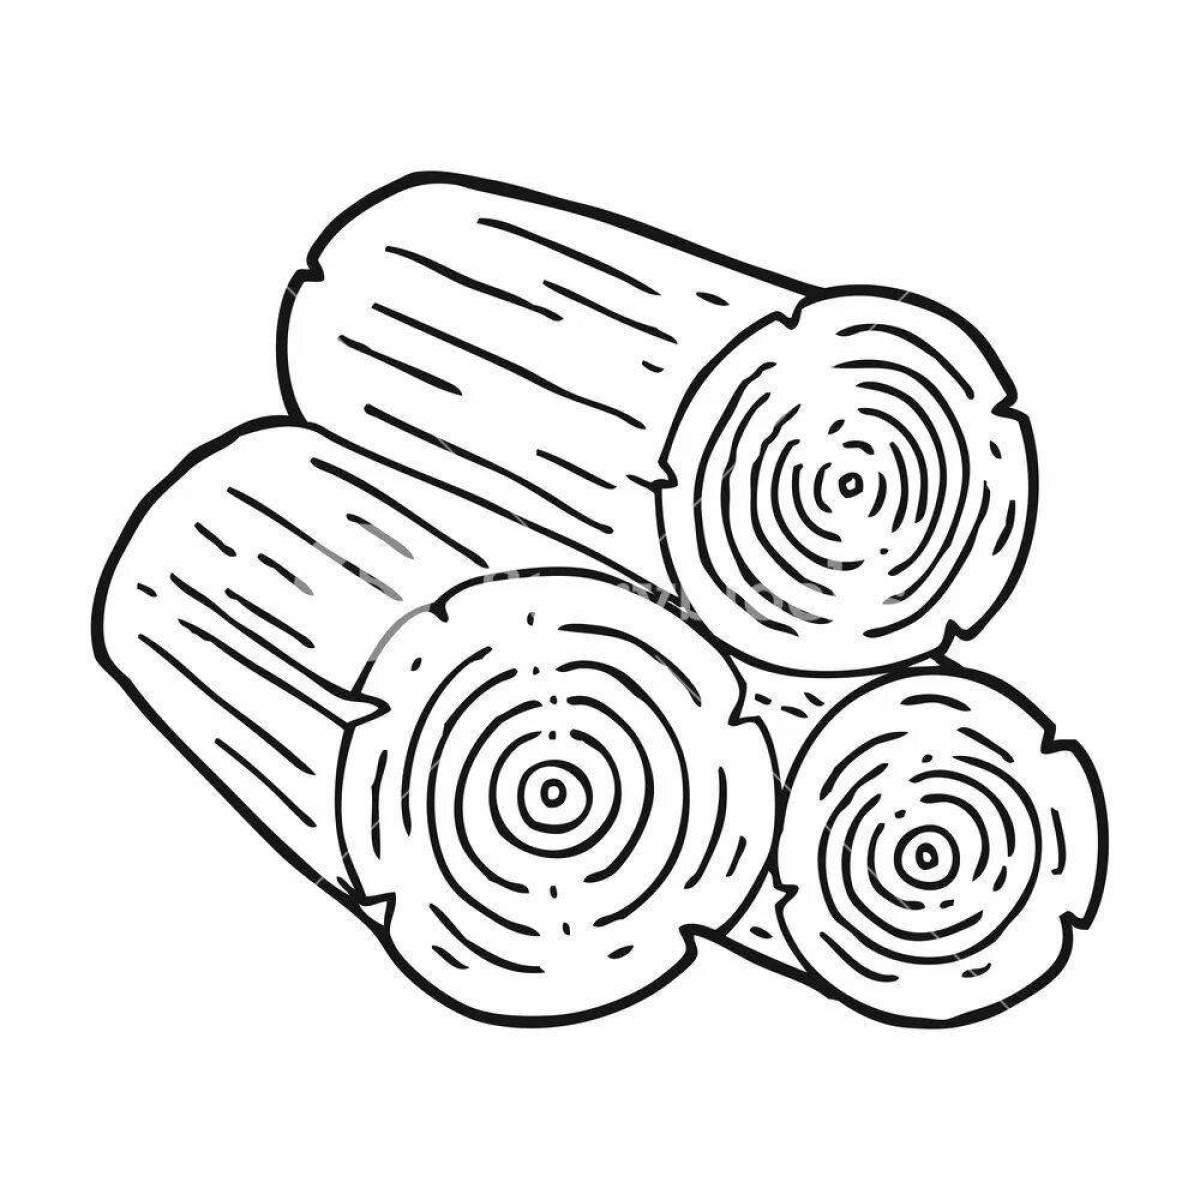 Charming firewood coloring book